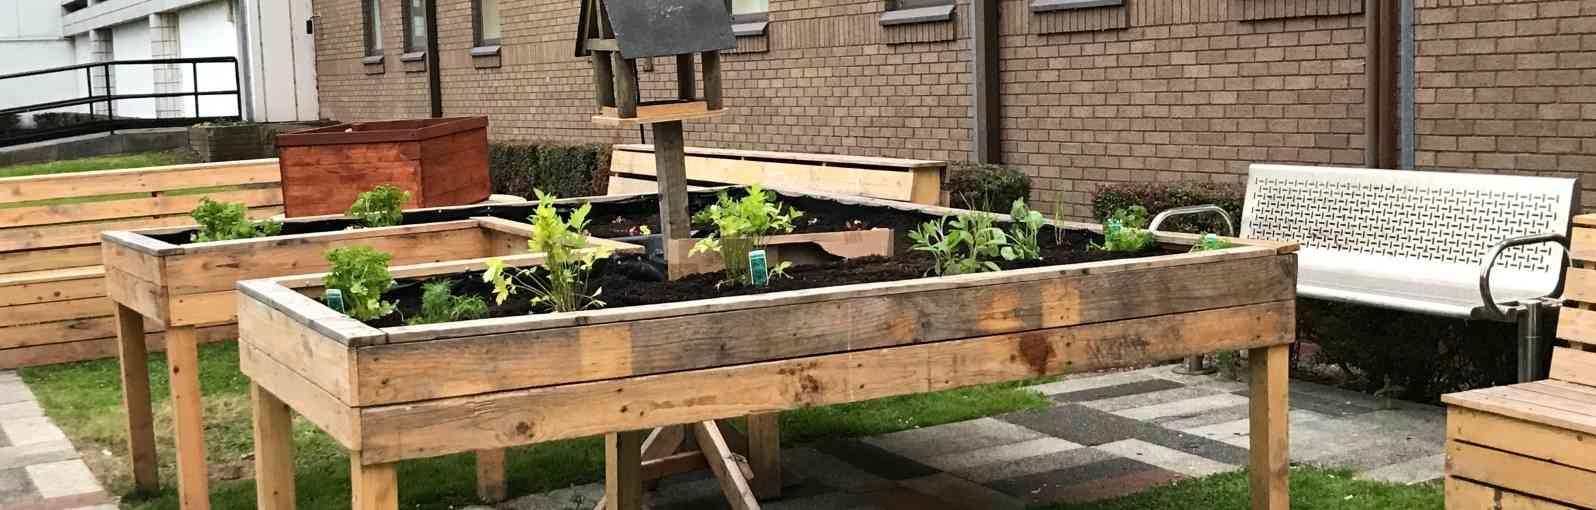 Community growing space with bird feeder